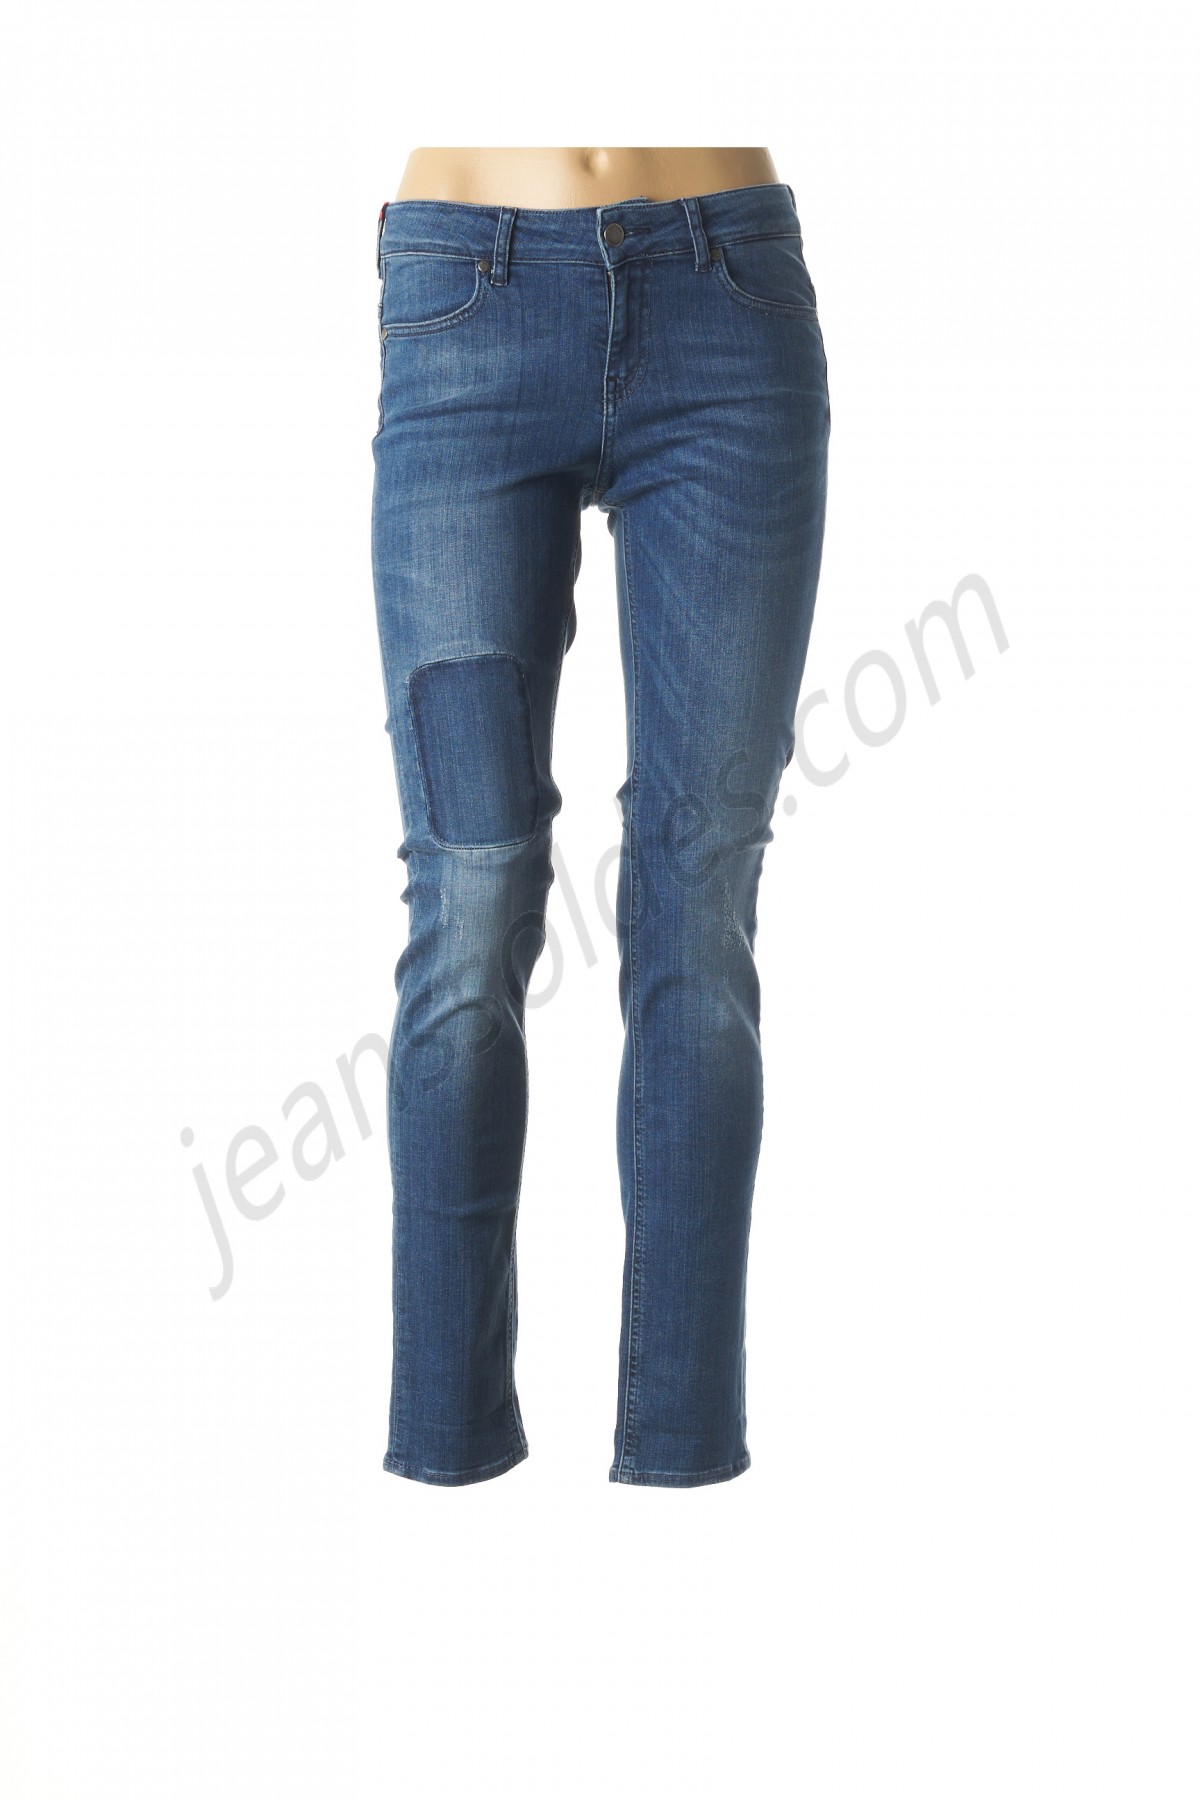 kanope-Jeans coupe slim prix d’amis - -0